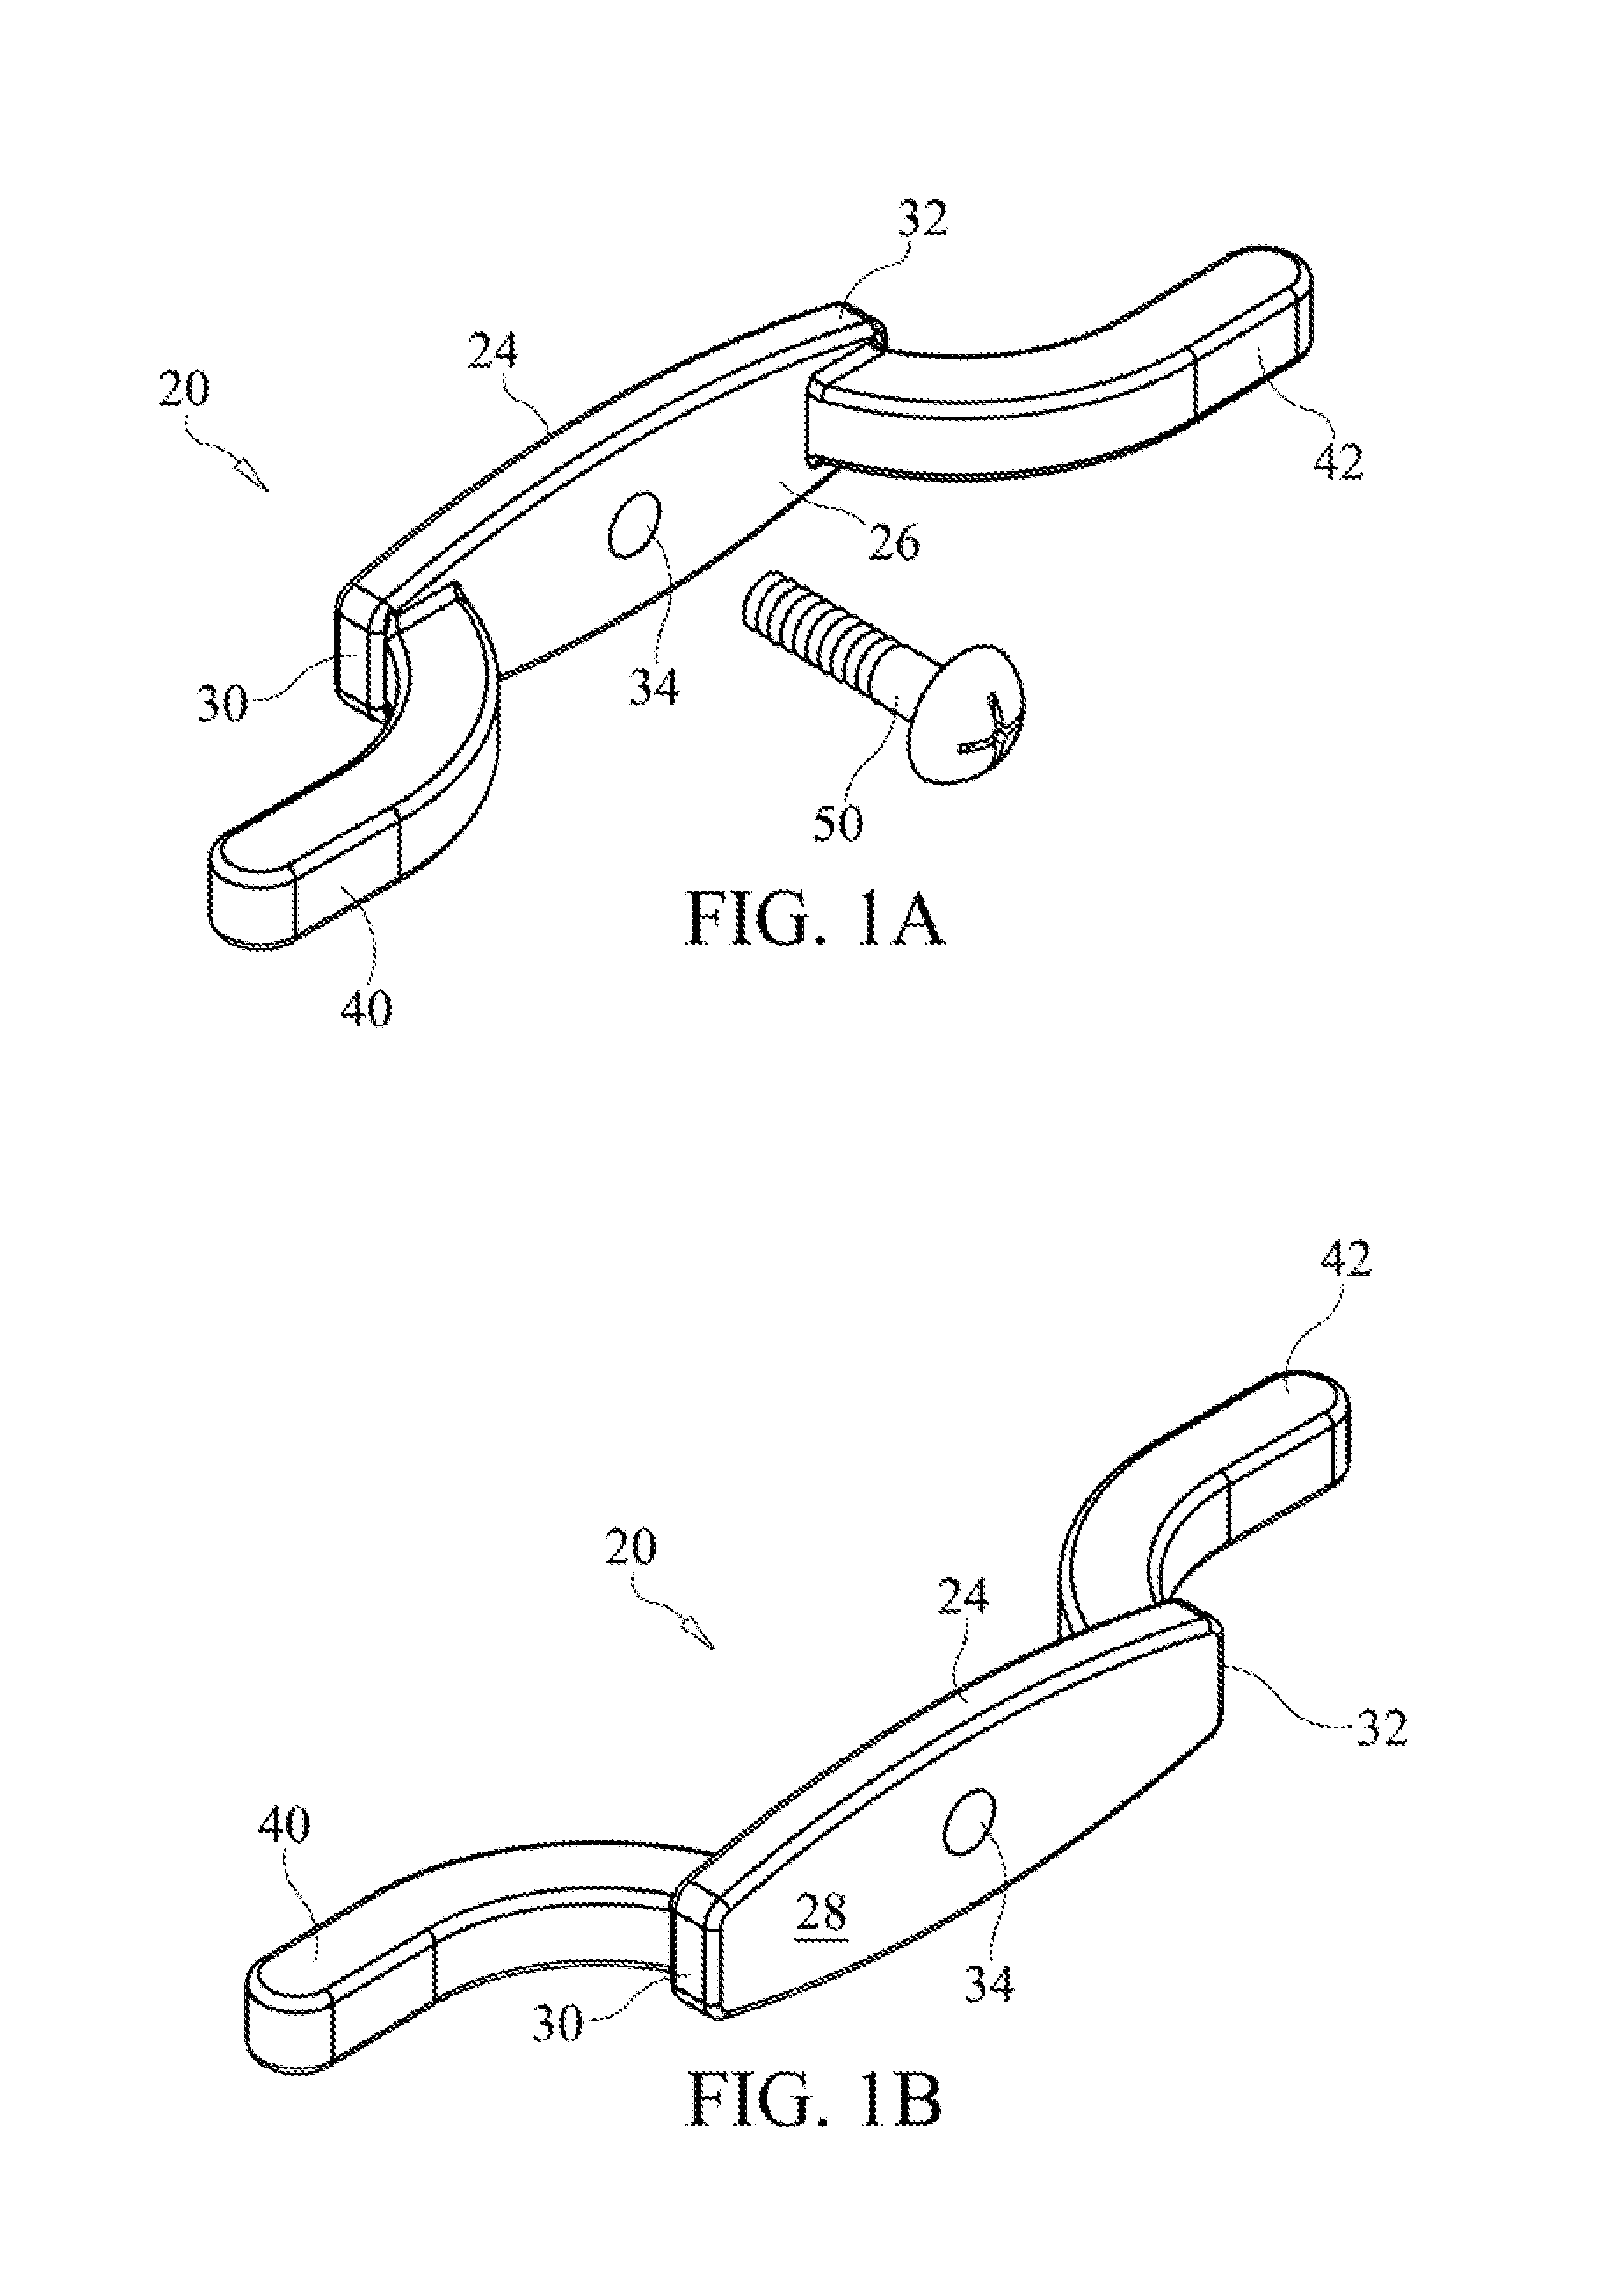 Tie-down cleat for a moving vehicle